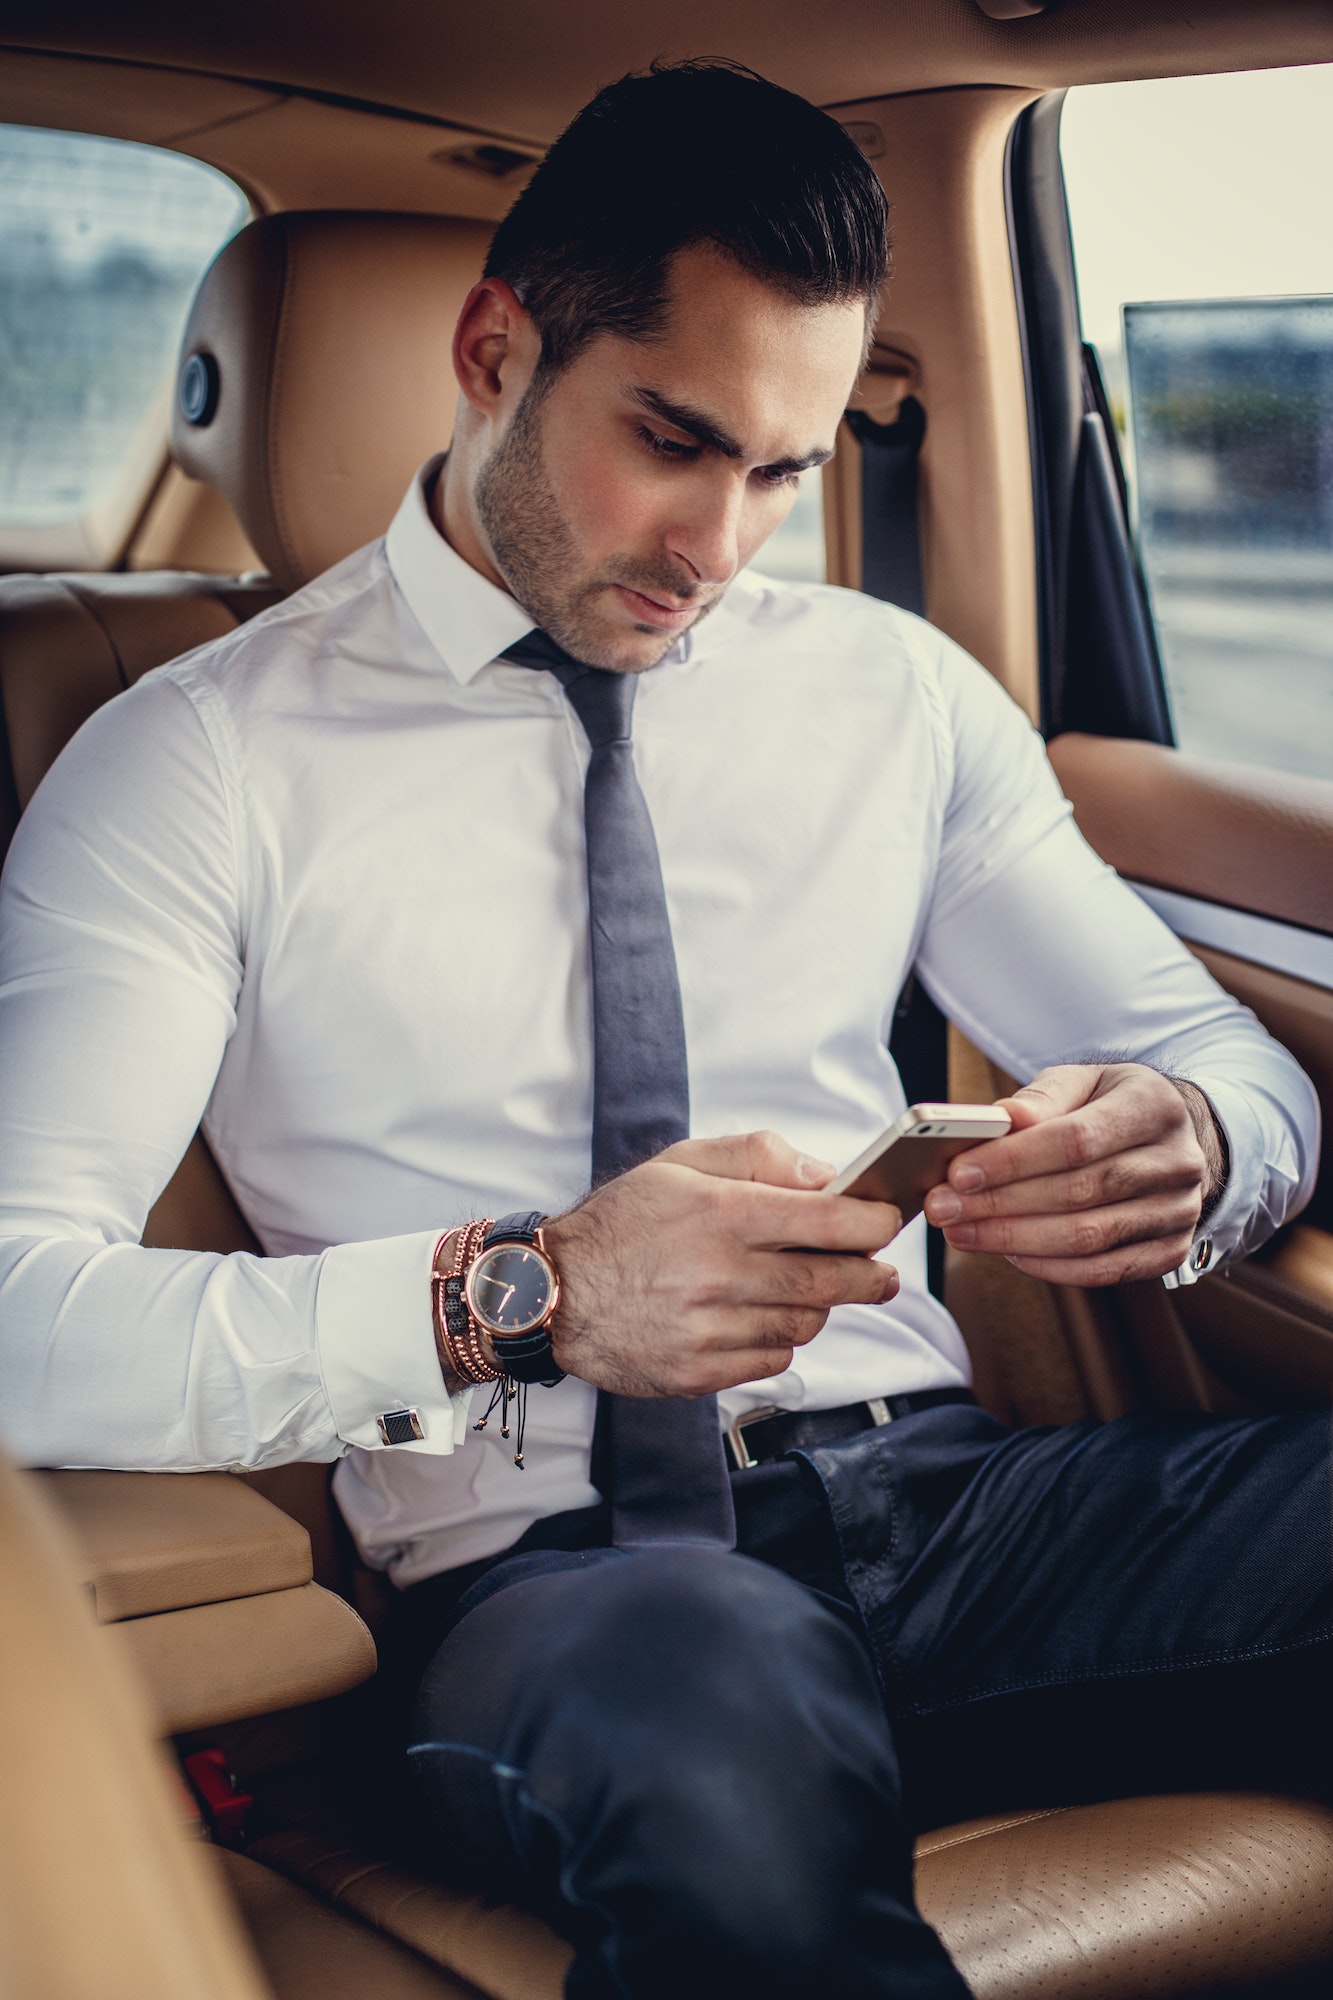 Stylish male in a white shirt using smartphone.